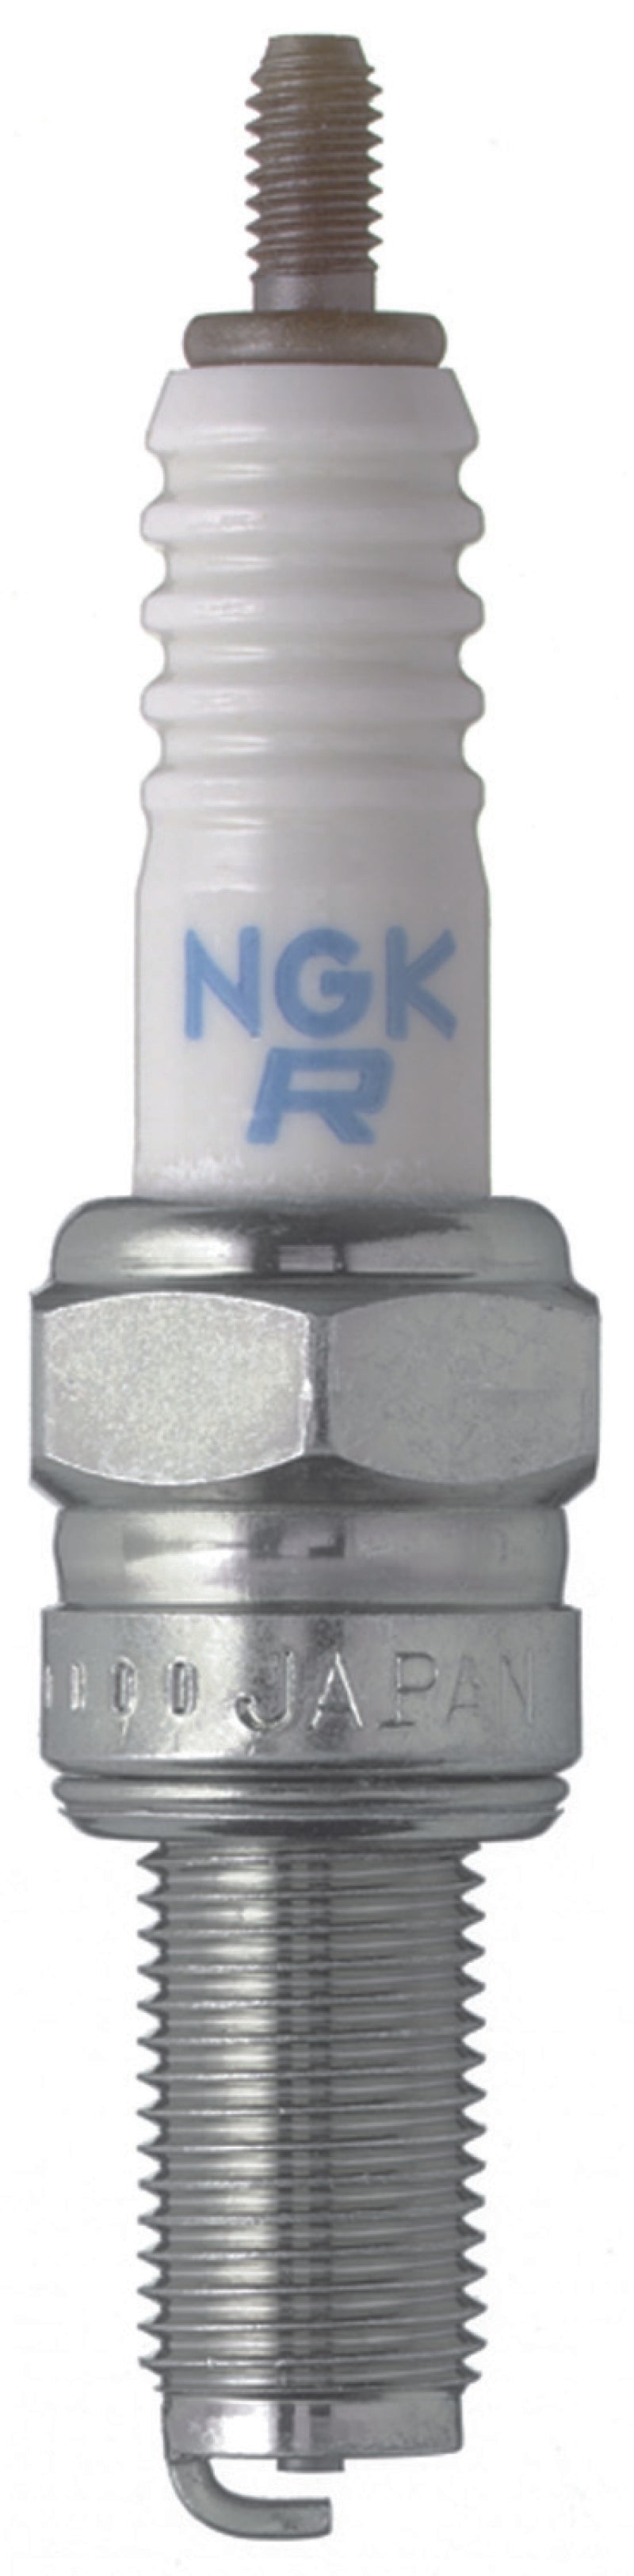 NGK Nickel Spark Plug - Box of 4 (CR8E) -  Shop now at Performance Car Parts